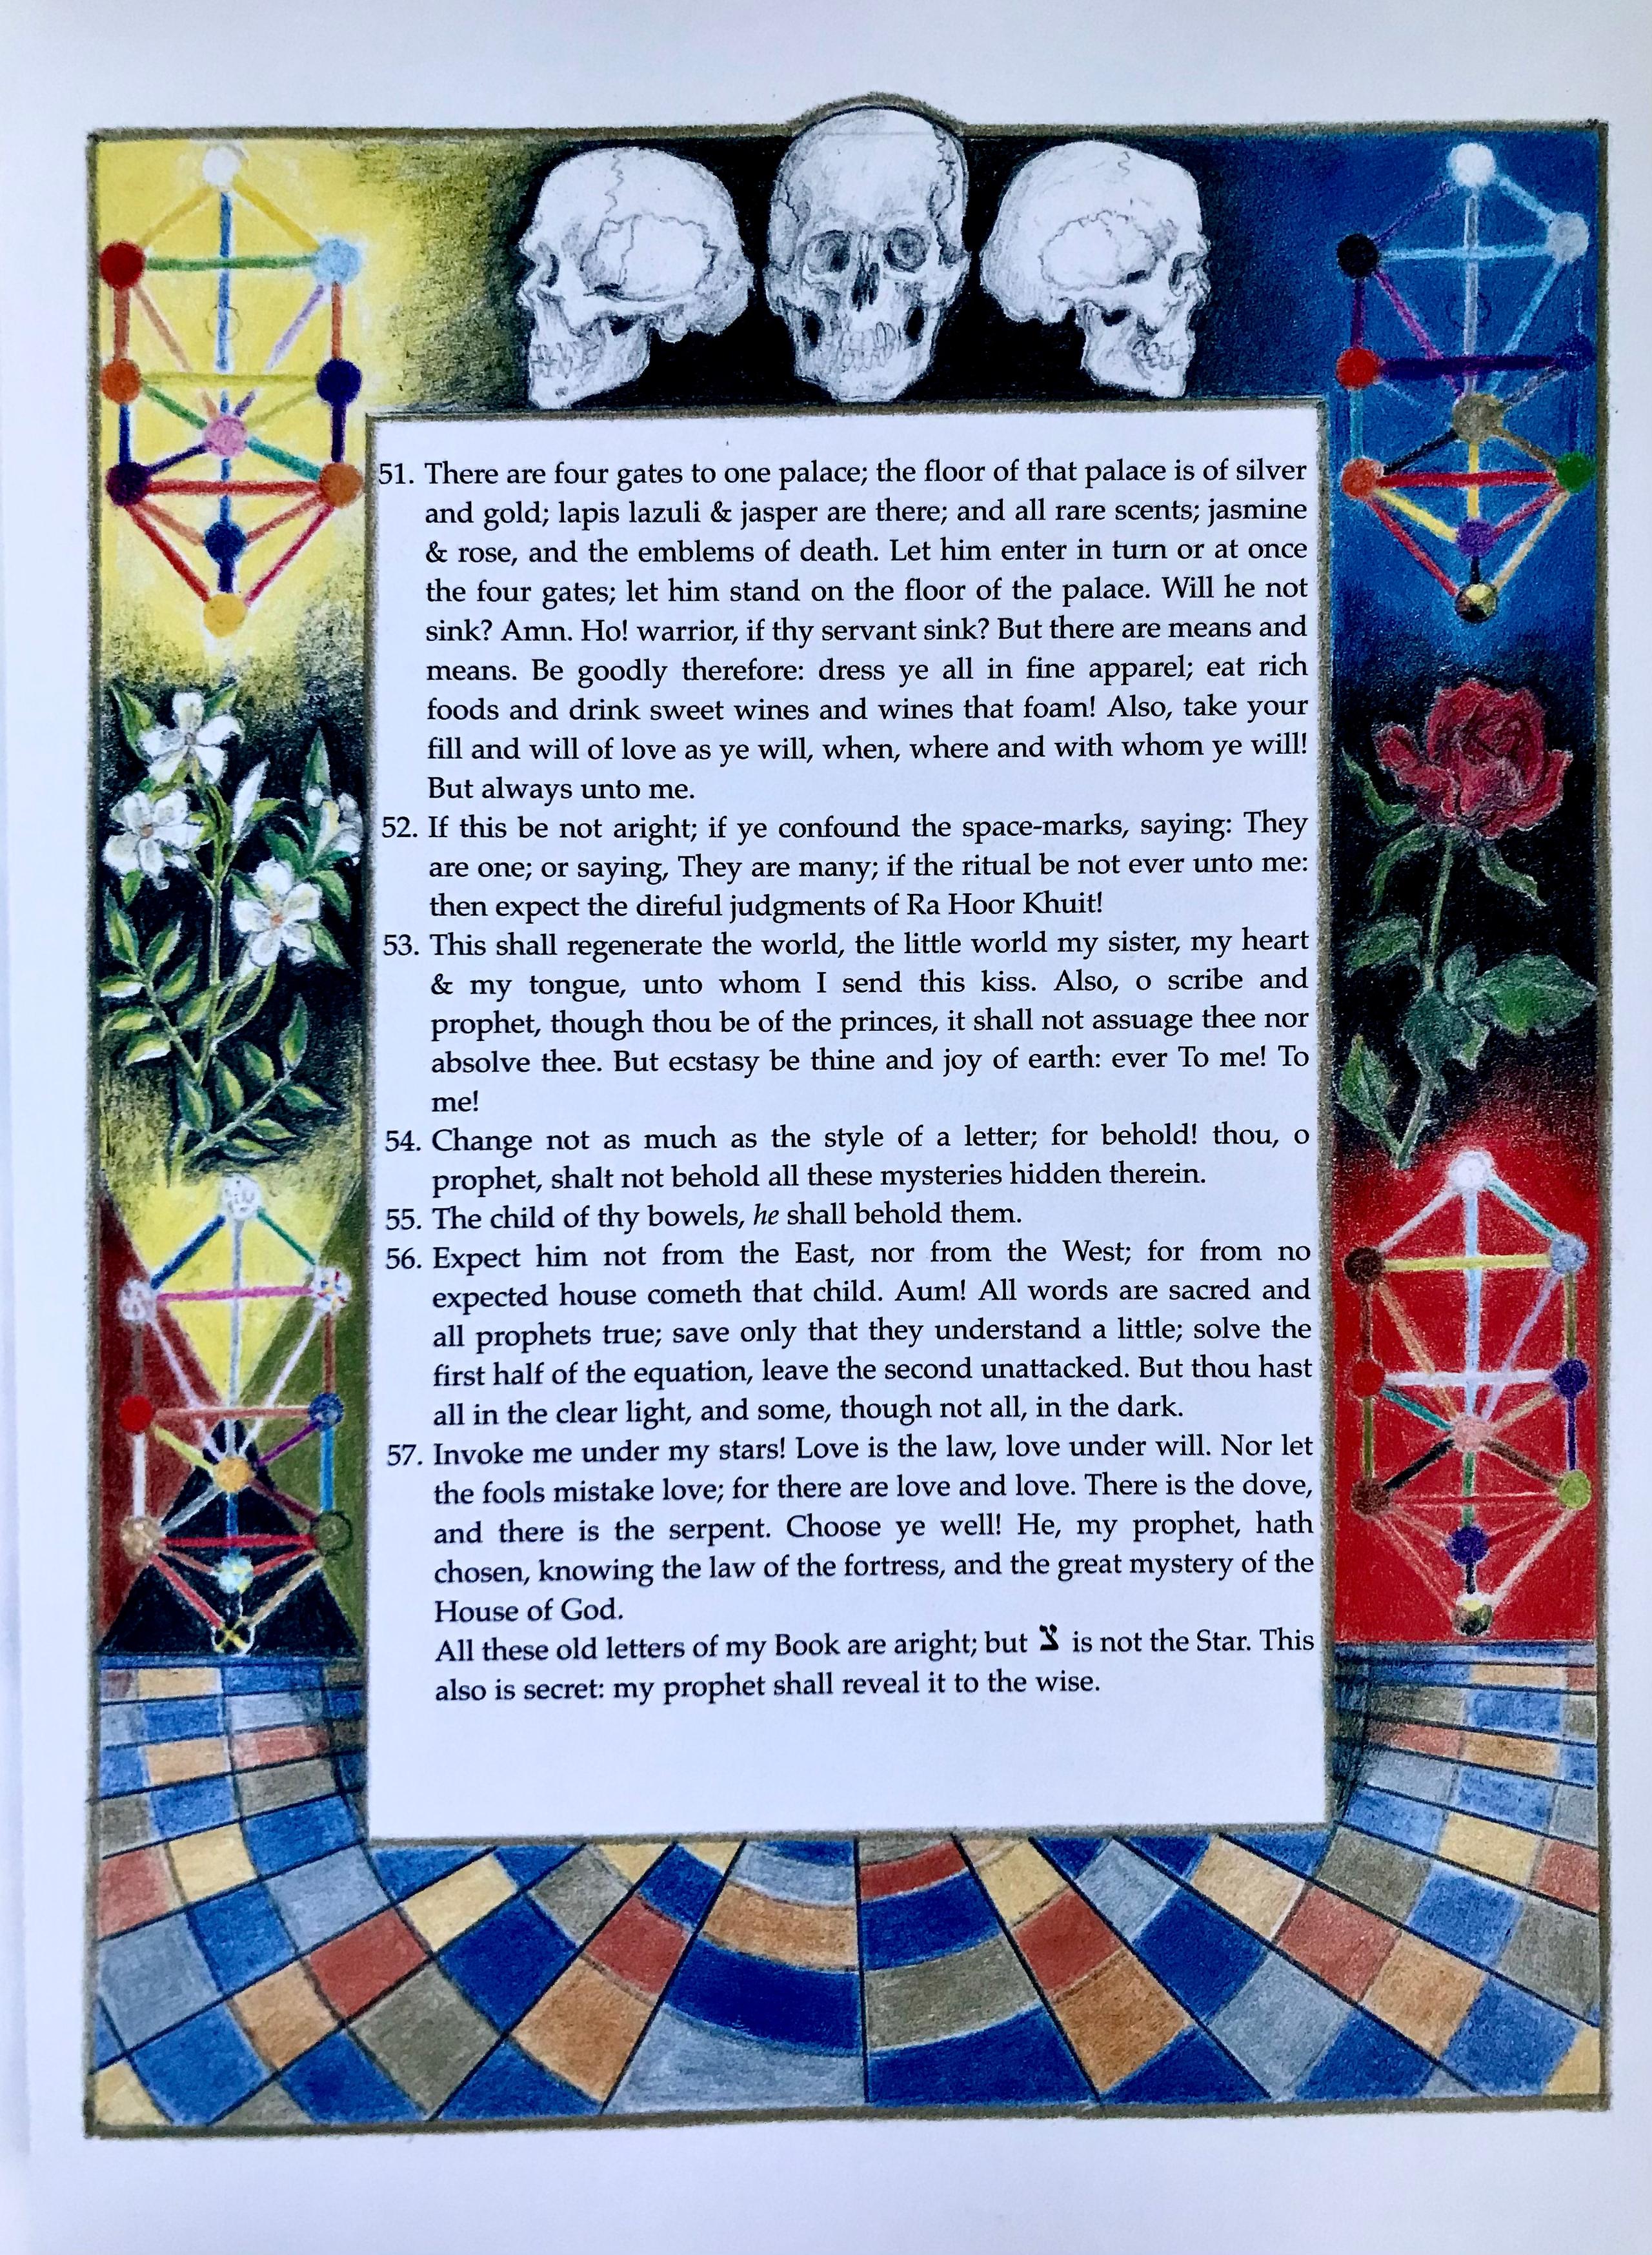 The Book Of The Law, The Illuminated Edition by Aleister Crowley, Illustrated by Susan Jameson